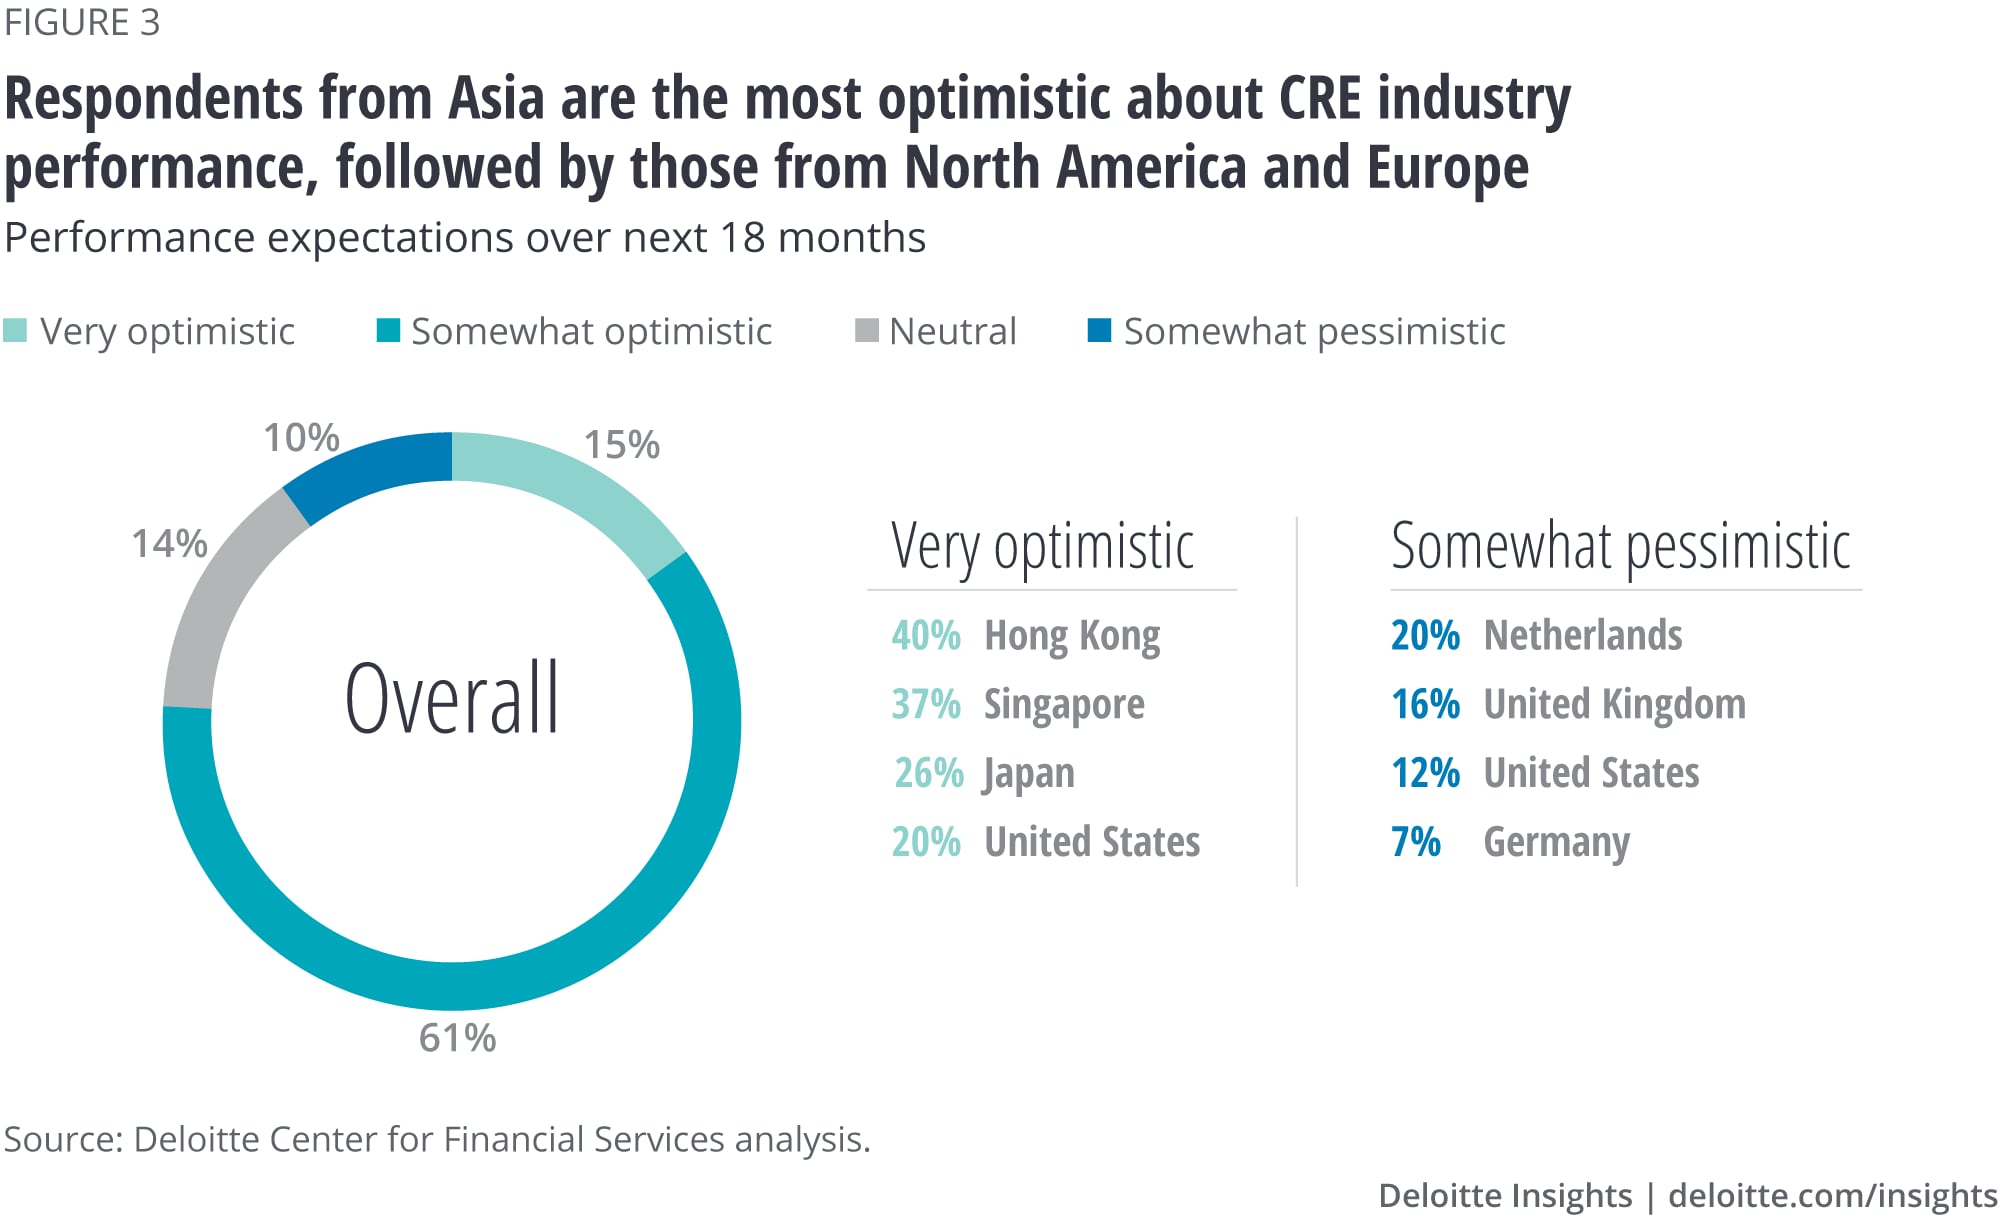 Respondents from Asia are the most optimistic about industry performance over the next 18 months, followed by those from North America and Europe